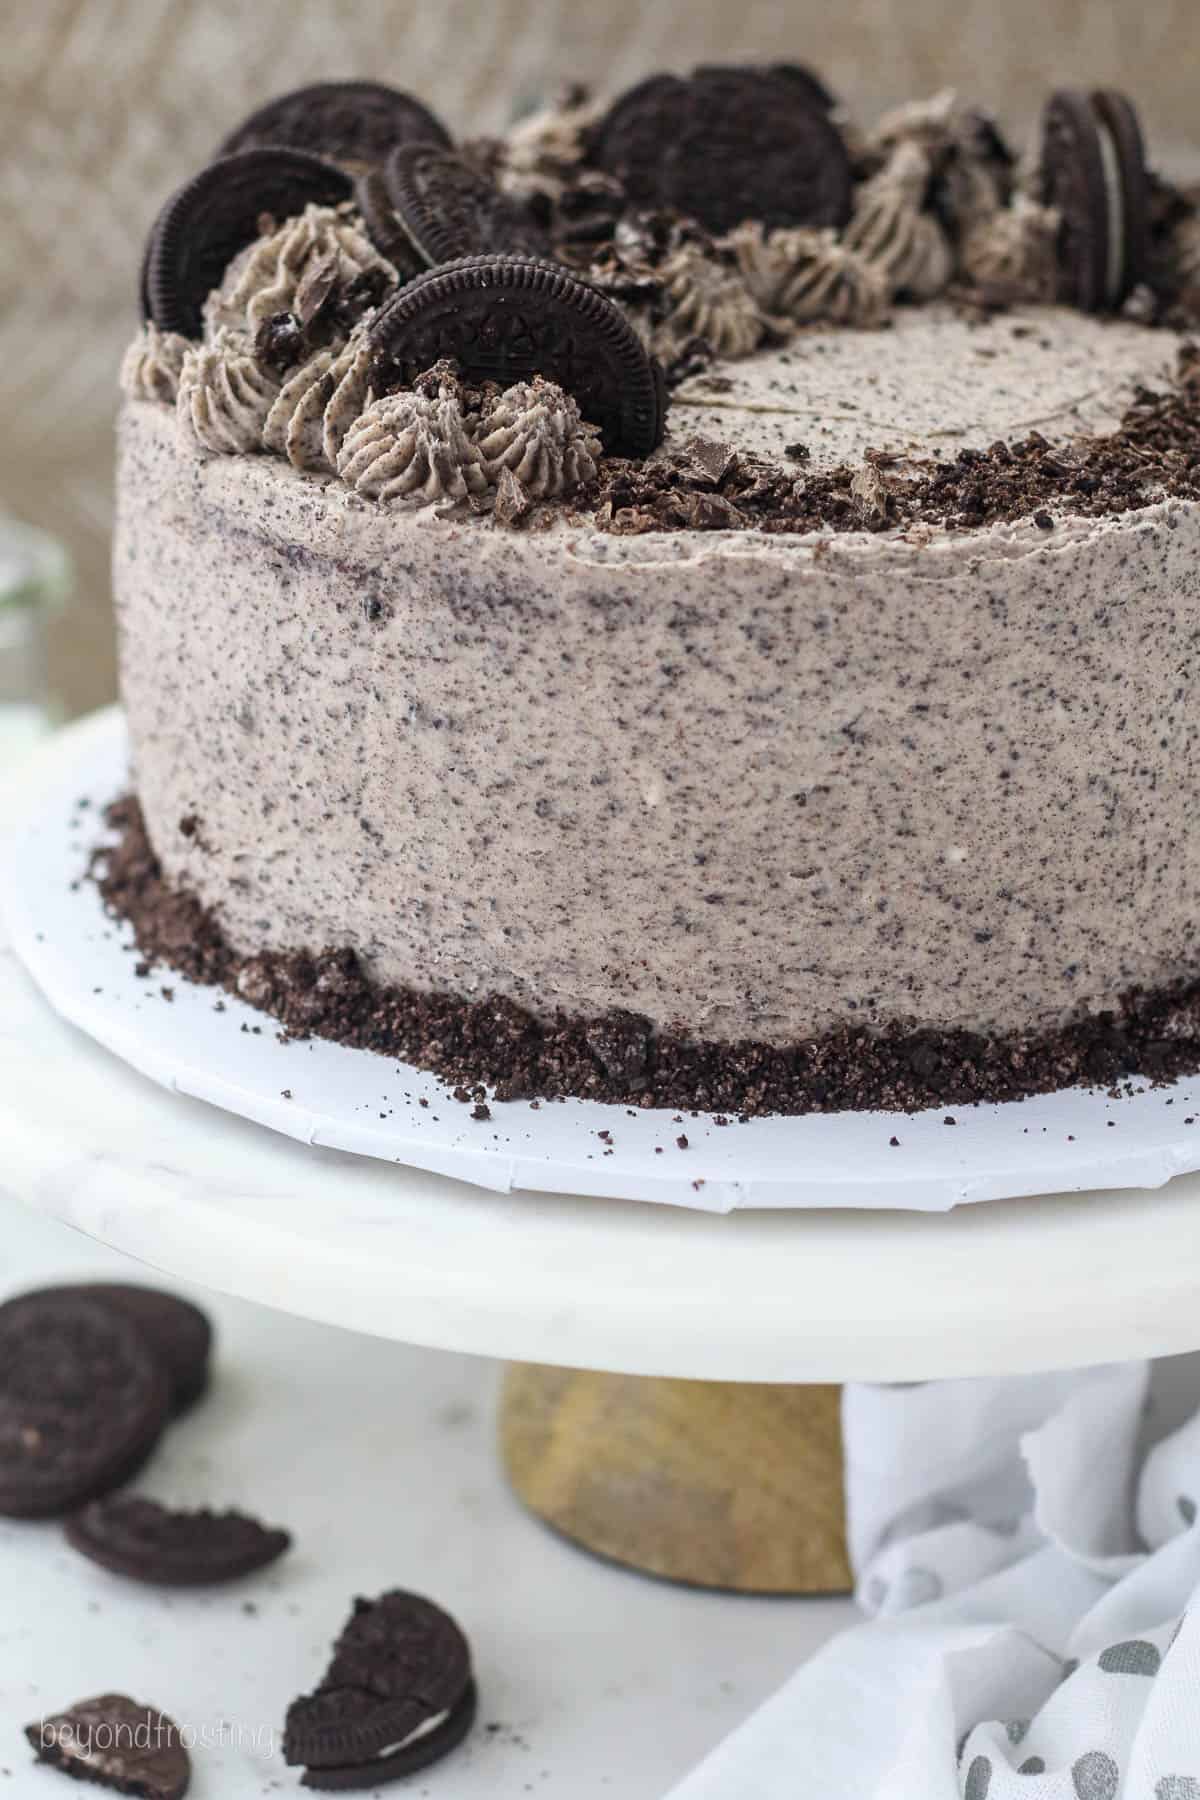 Close up of a whole frosted Oreo chocolate cake garnished with Oreo cookies on a cake stand.